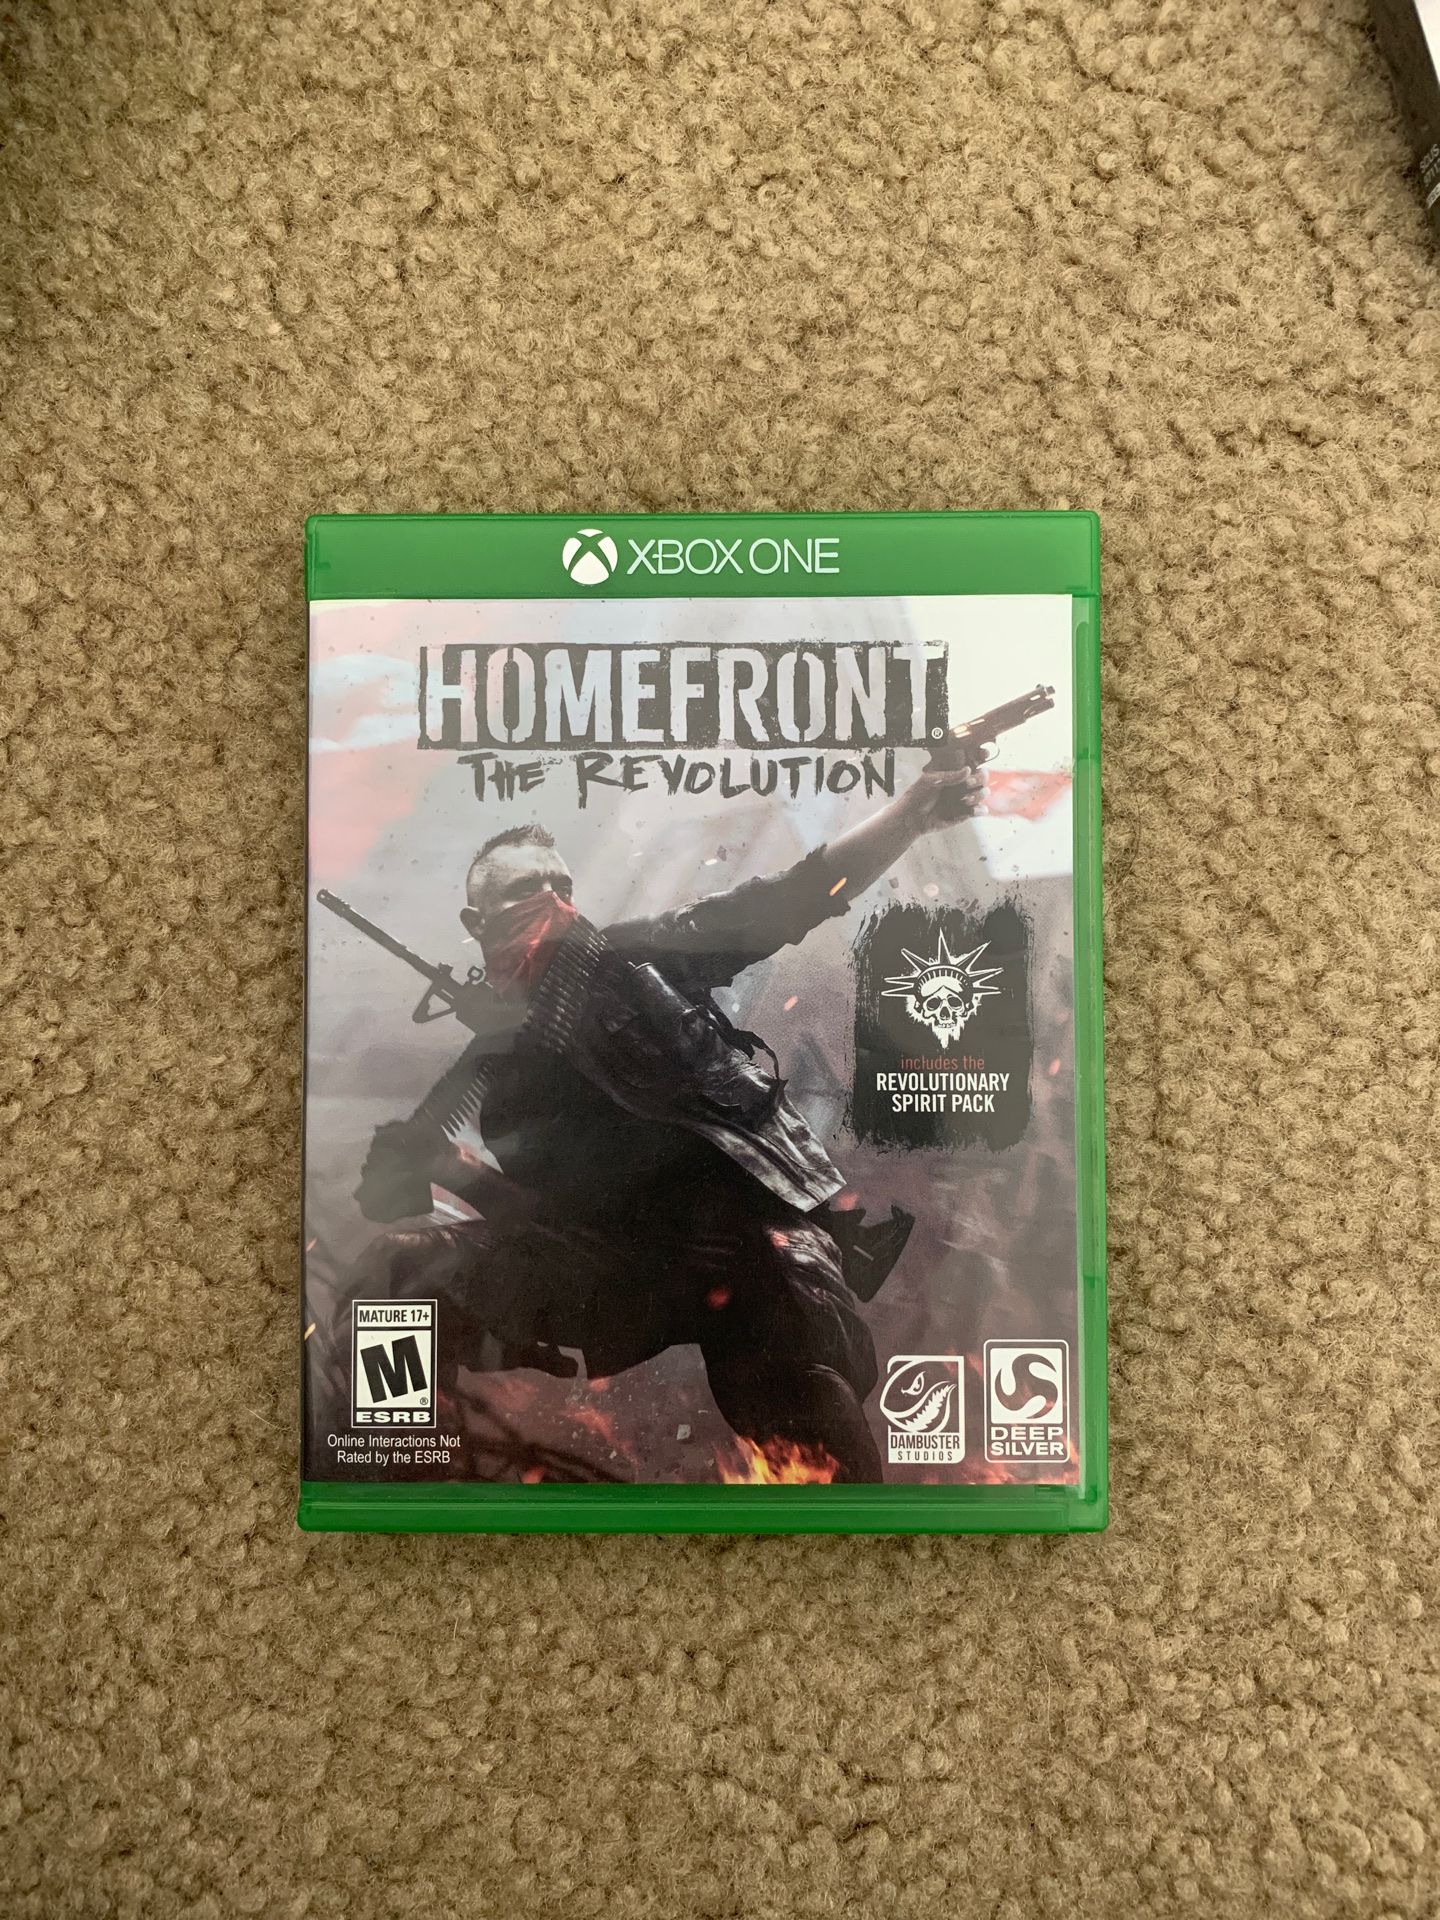 Home front Xbox 1